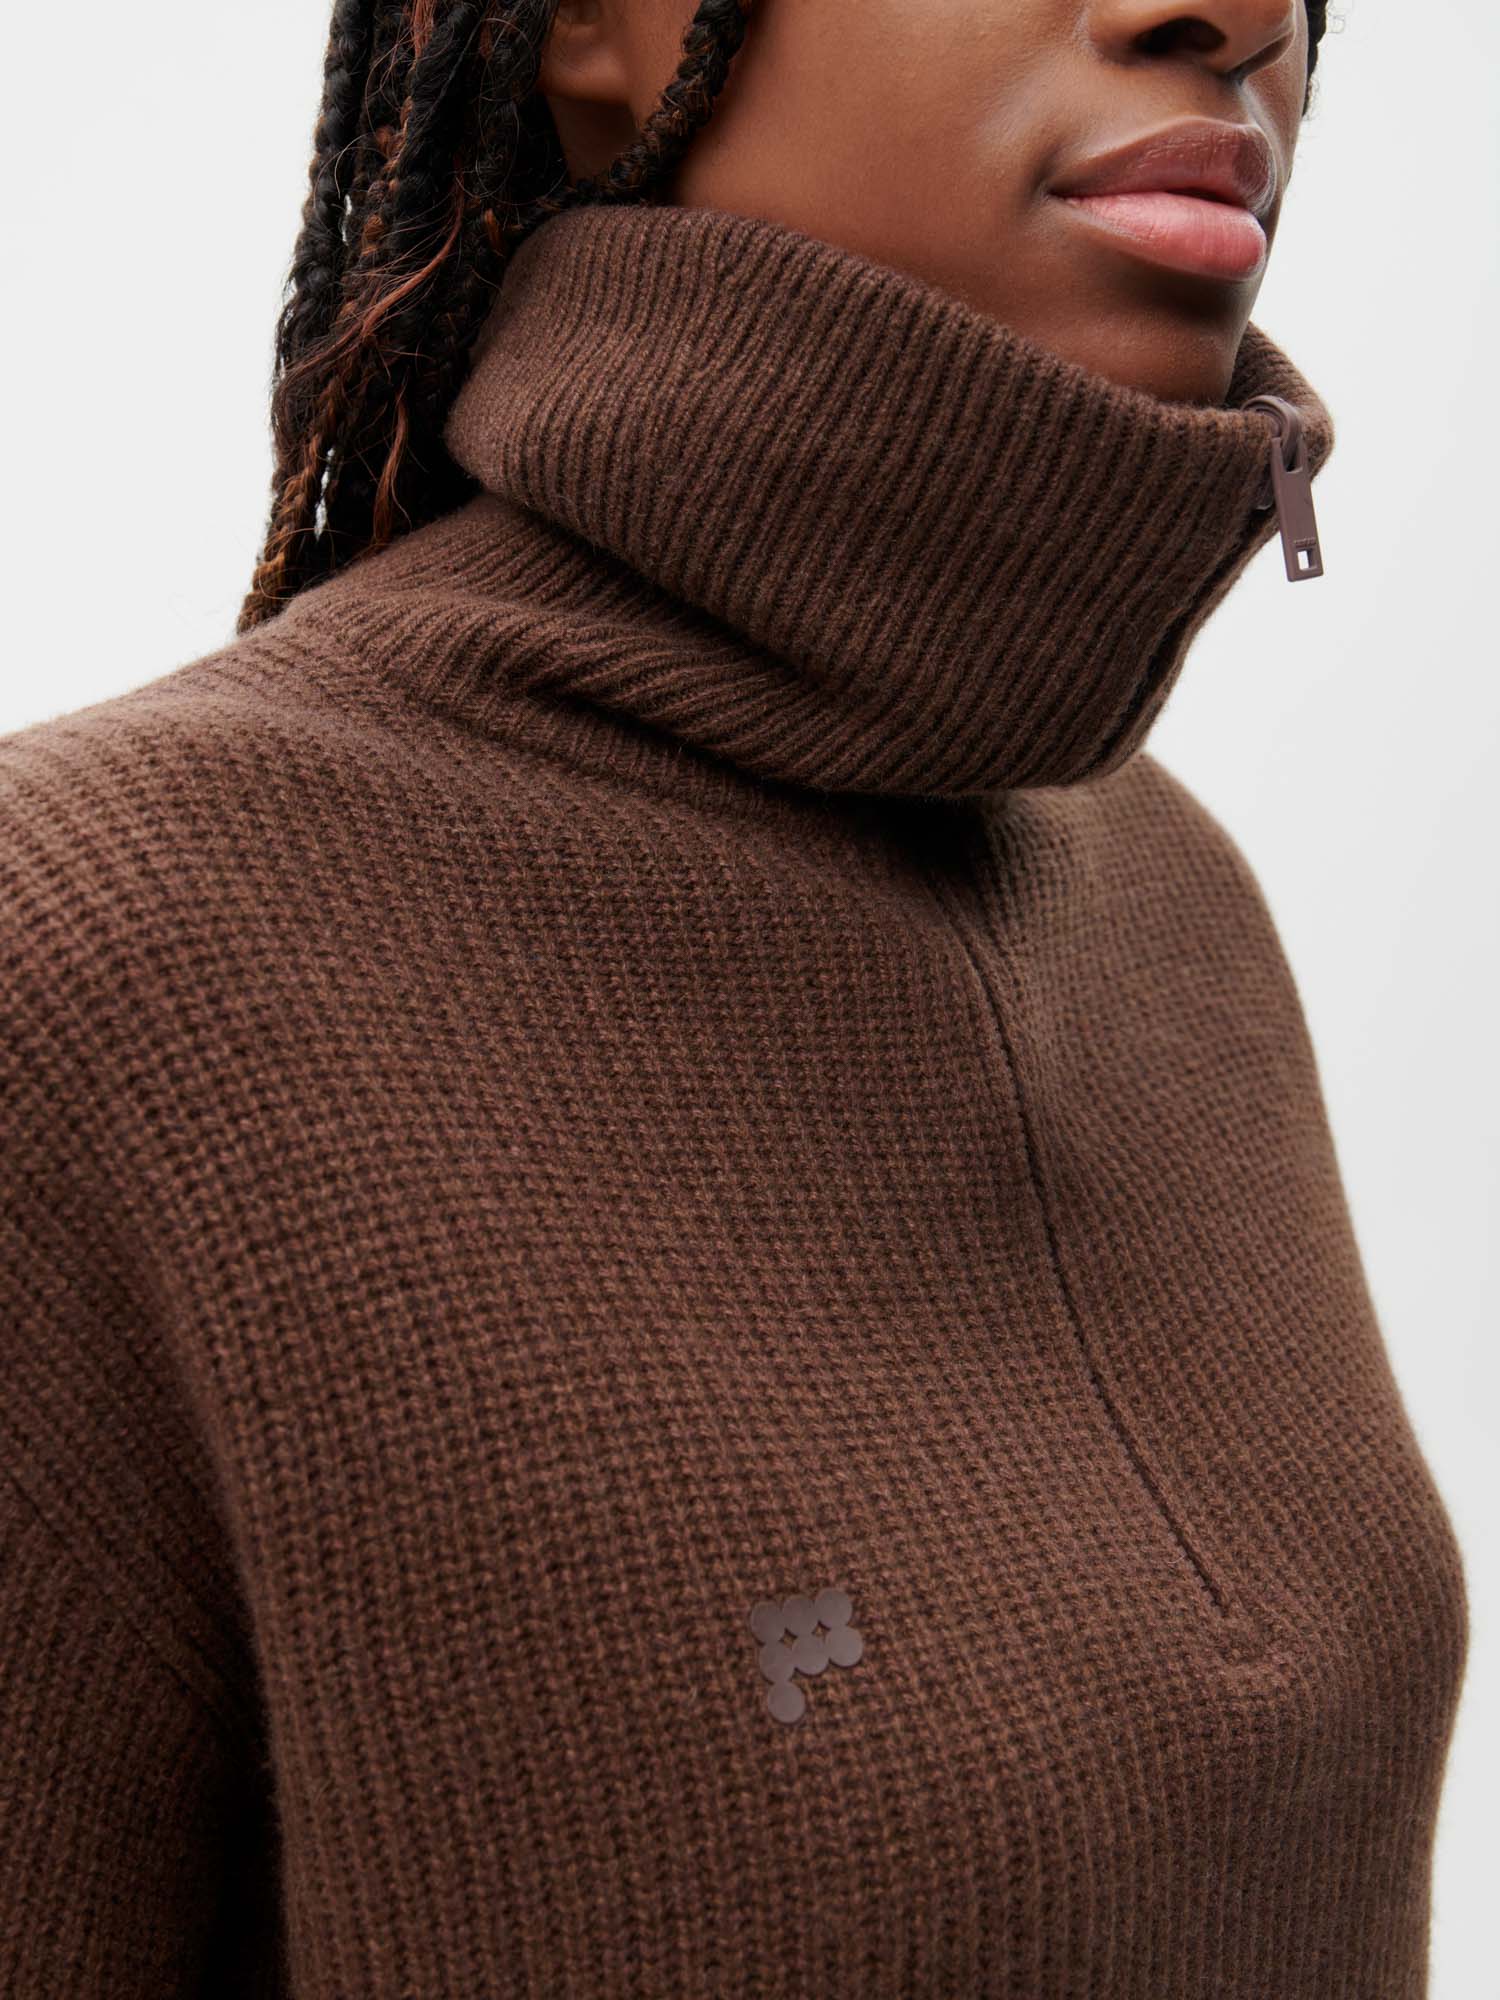 Recycled Cashmere Half Zip—chestnut brown female